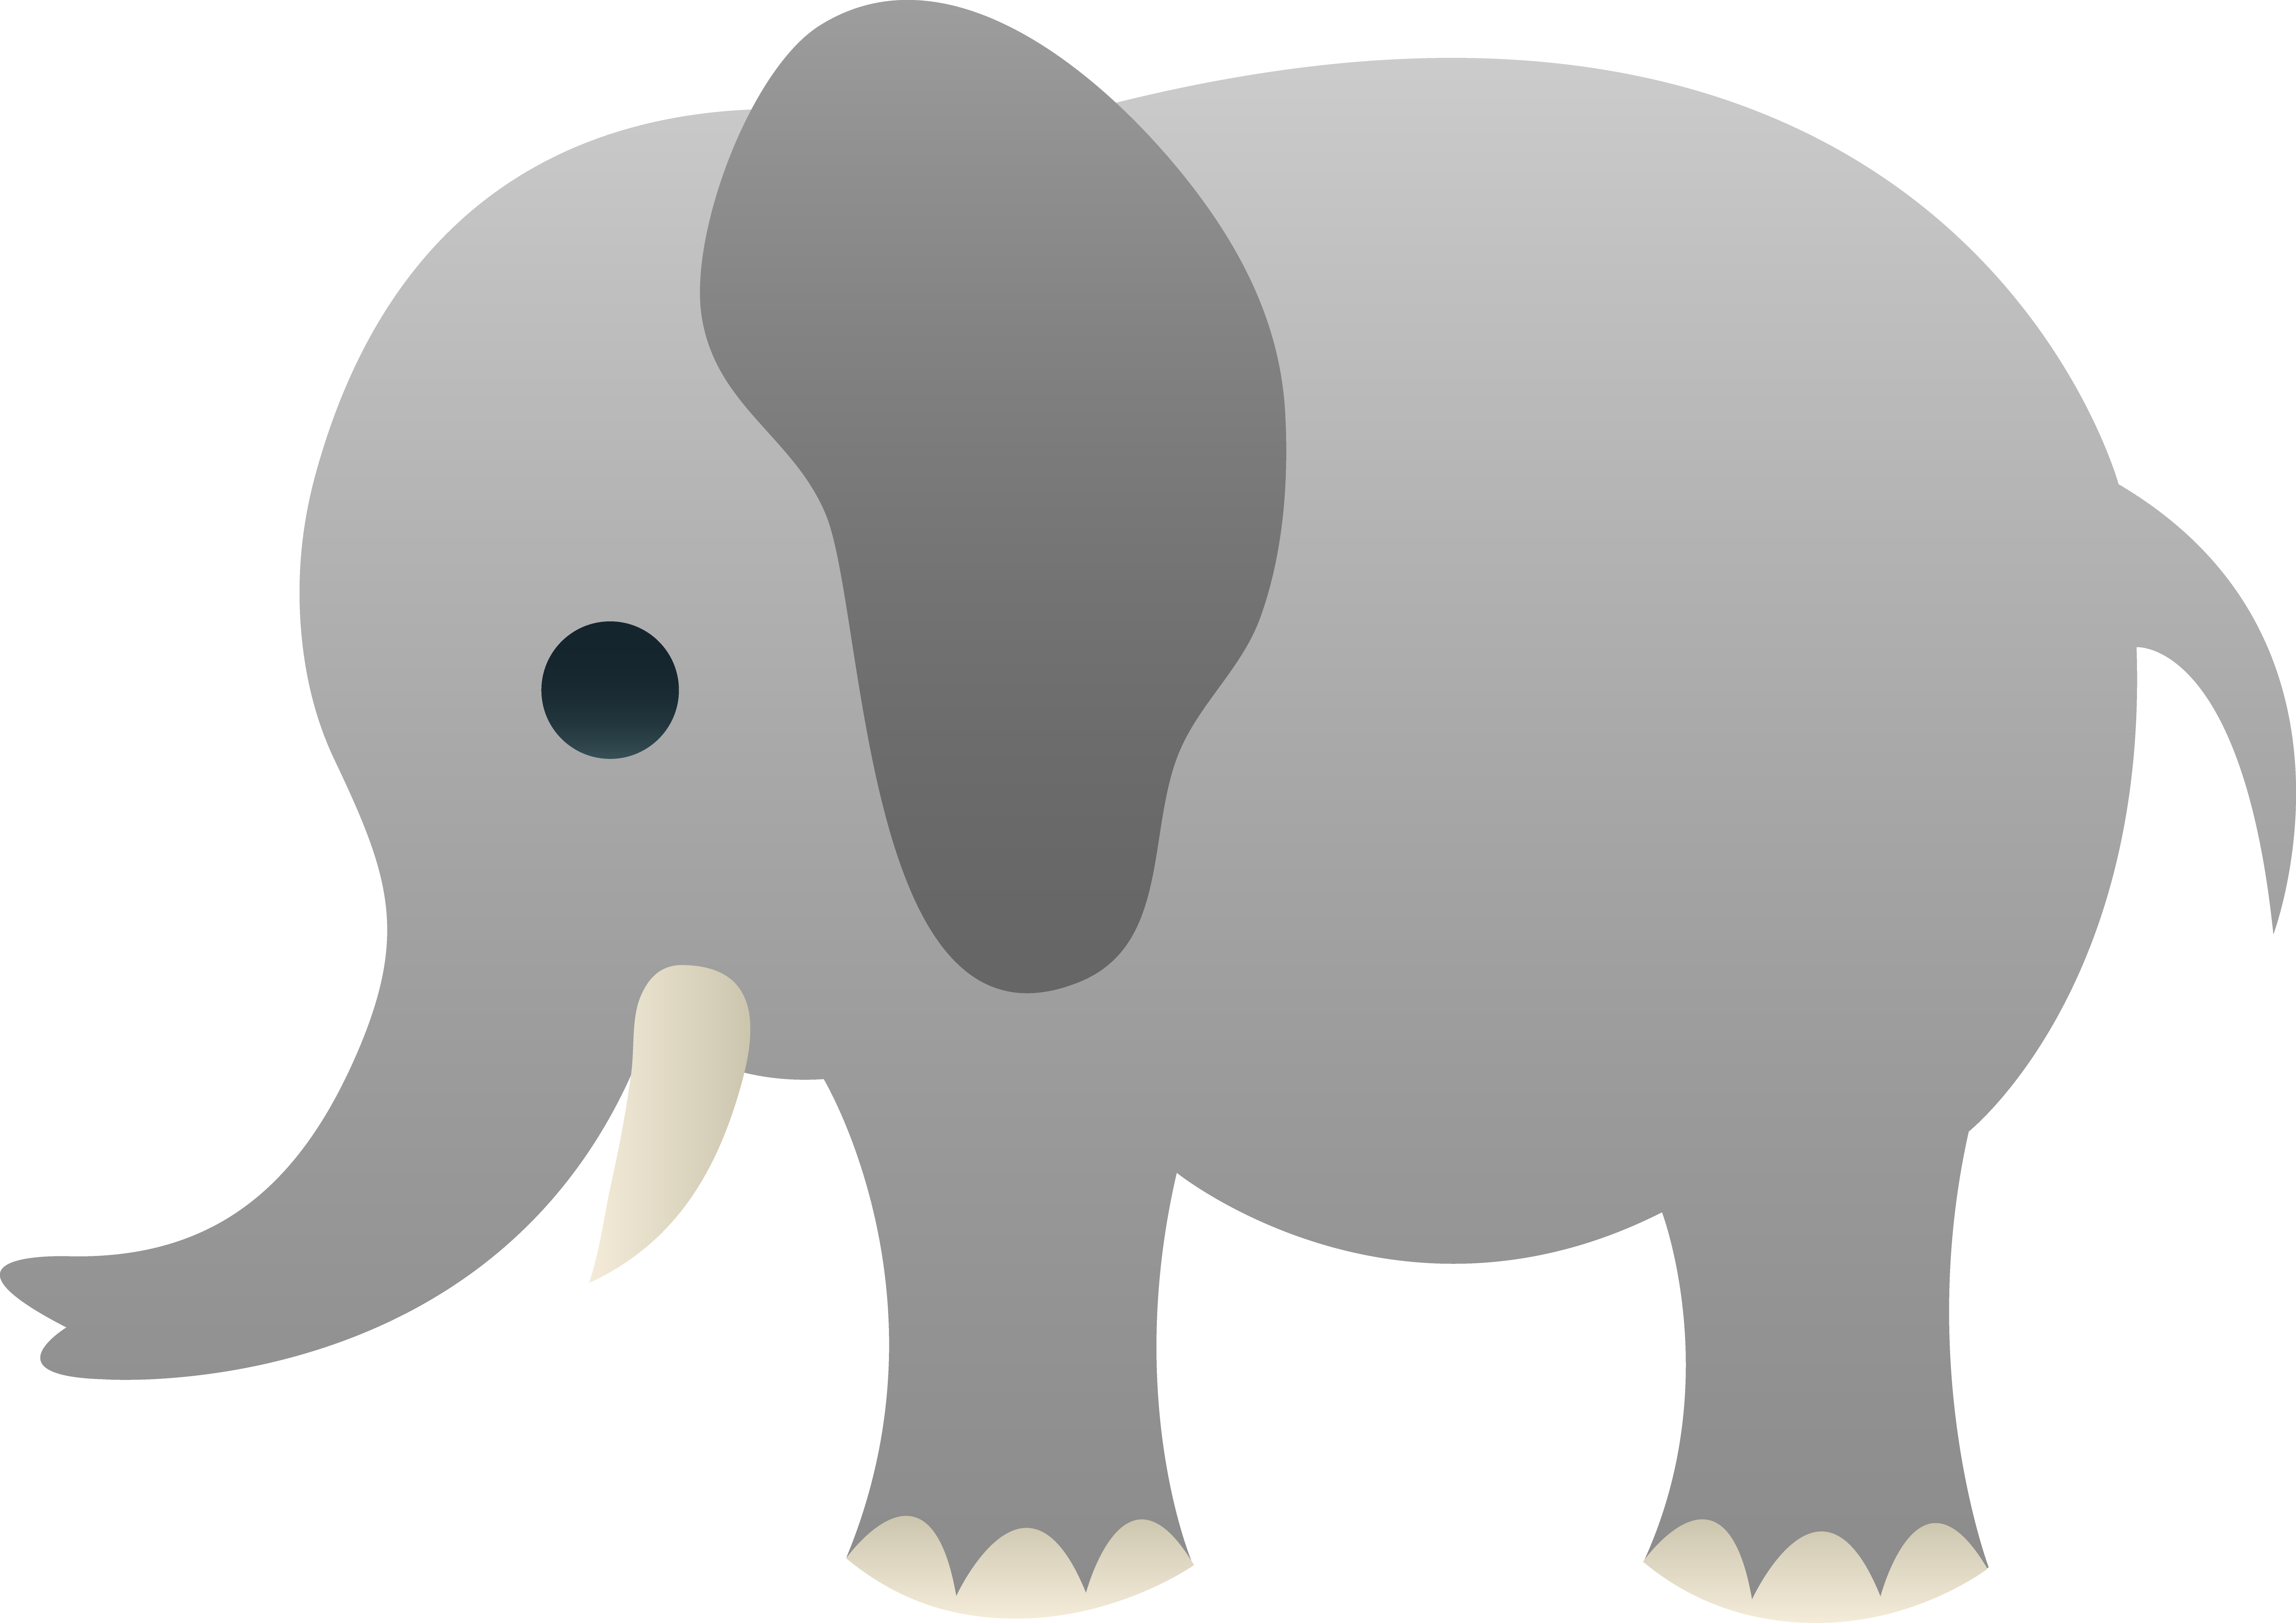 Elephant Pictures Free - ClipArt Best